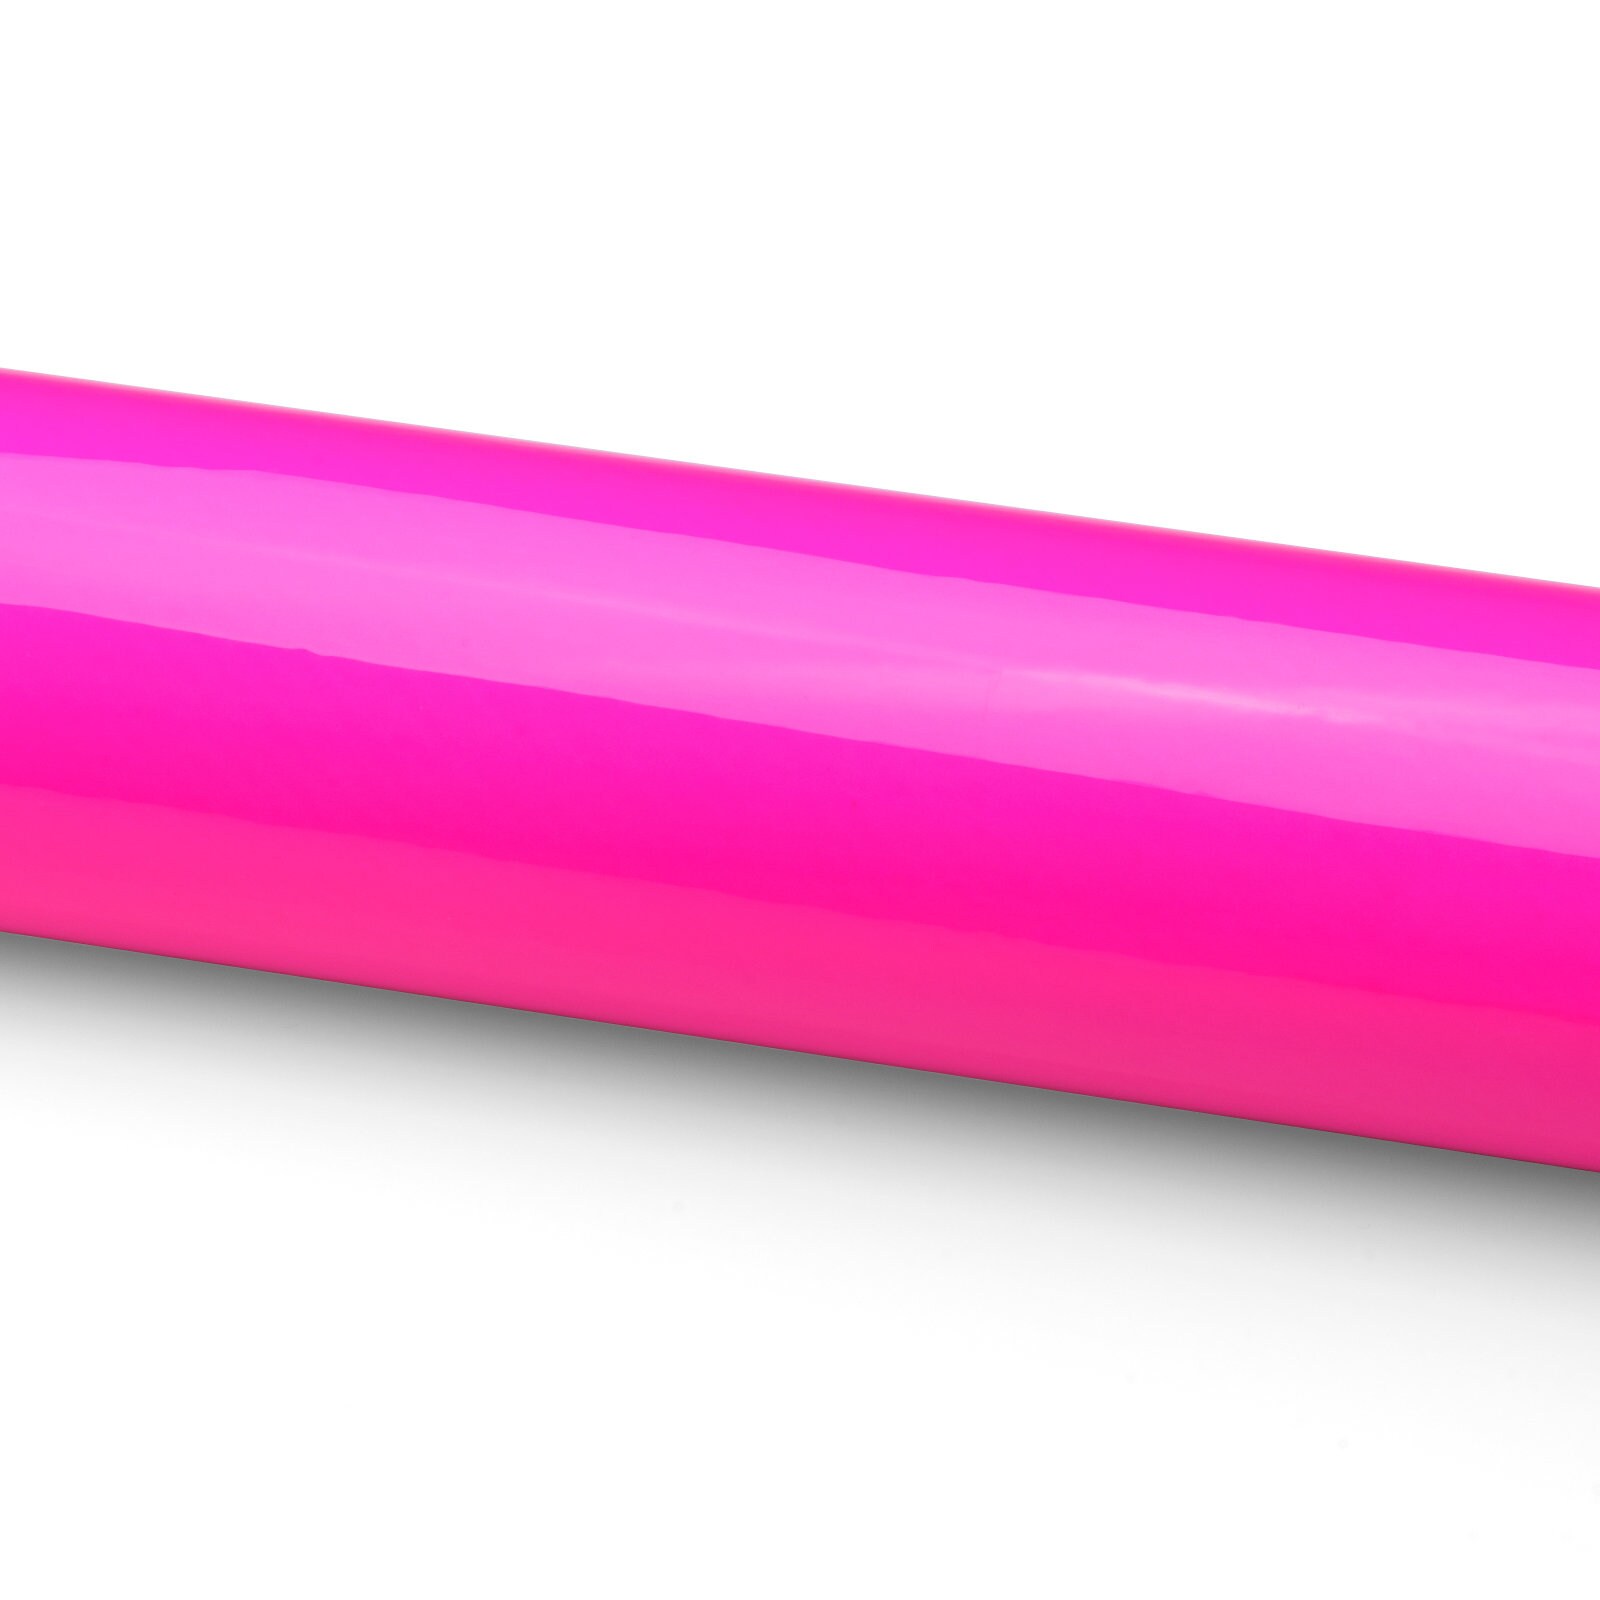 Gloss Fluorescent Pink Vinyl Wrap Sticker Decal Bubble Free Air Release Car  Vehicle DIY Film 